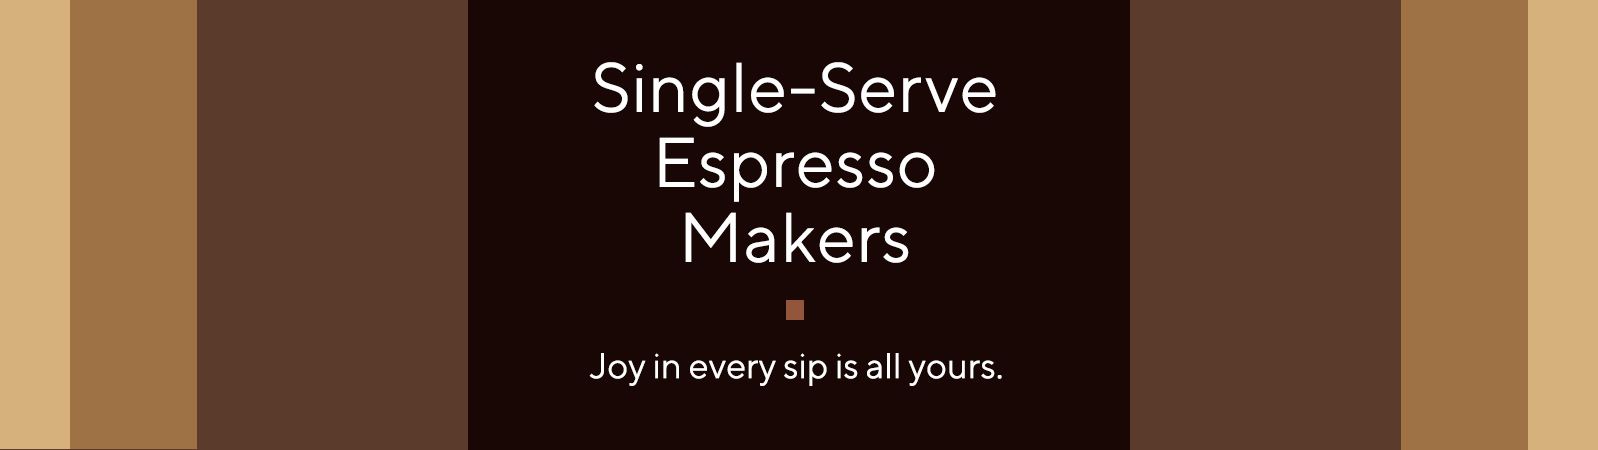 Single-Serve Espresso Makers  Joy in every sip is all yours. 